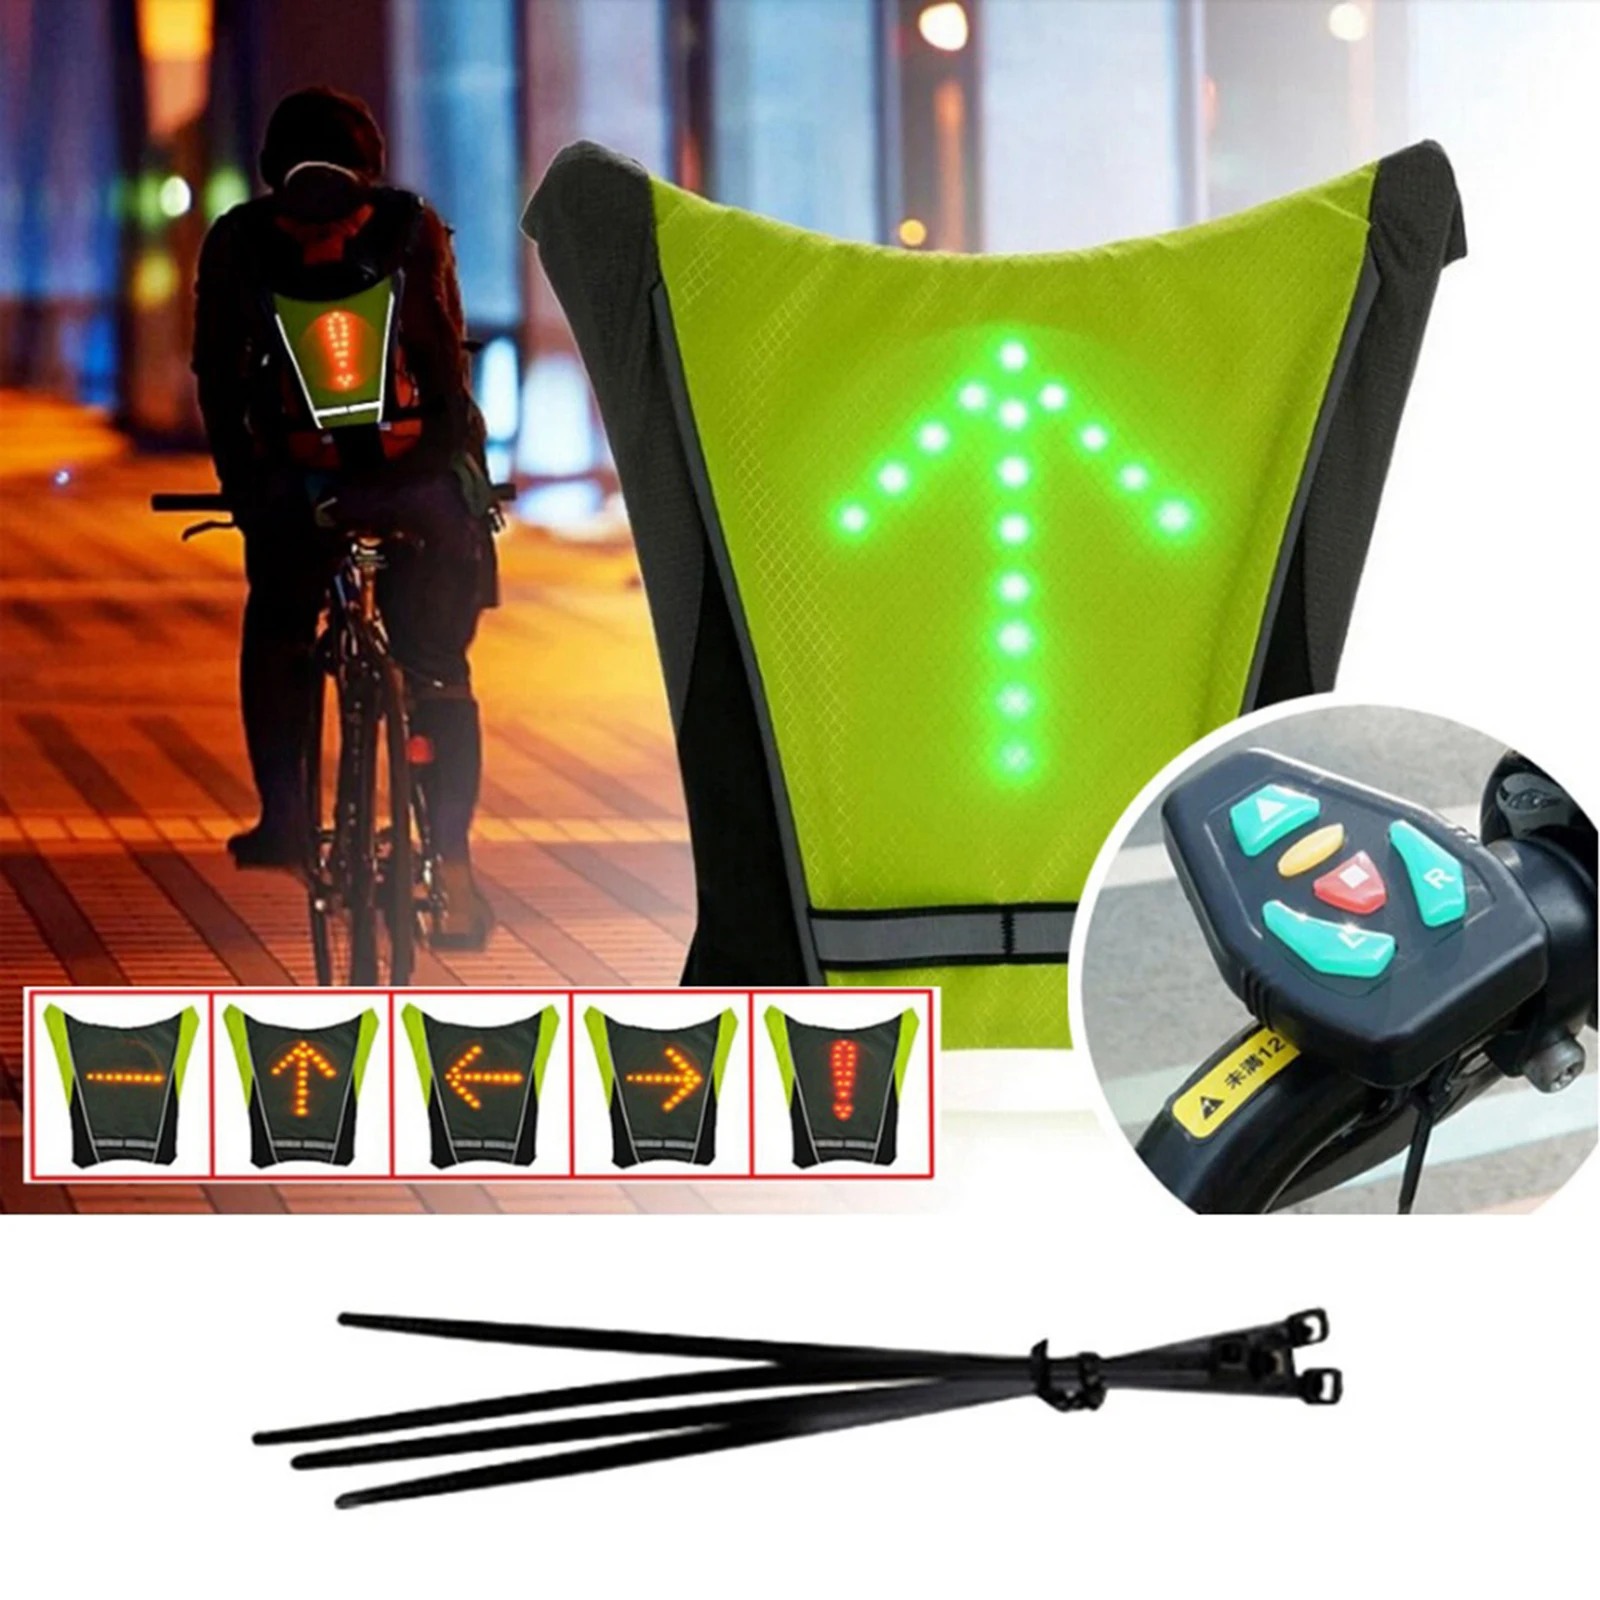 Reflective Cycling , LED Turning Signal Light, Scooter Night 4 Indicators Remote Control for Cycling Running Walking Jogging